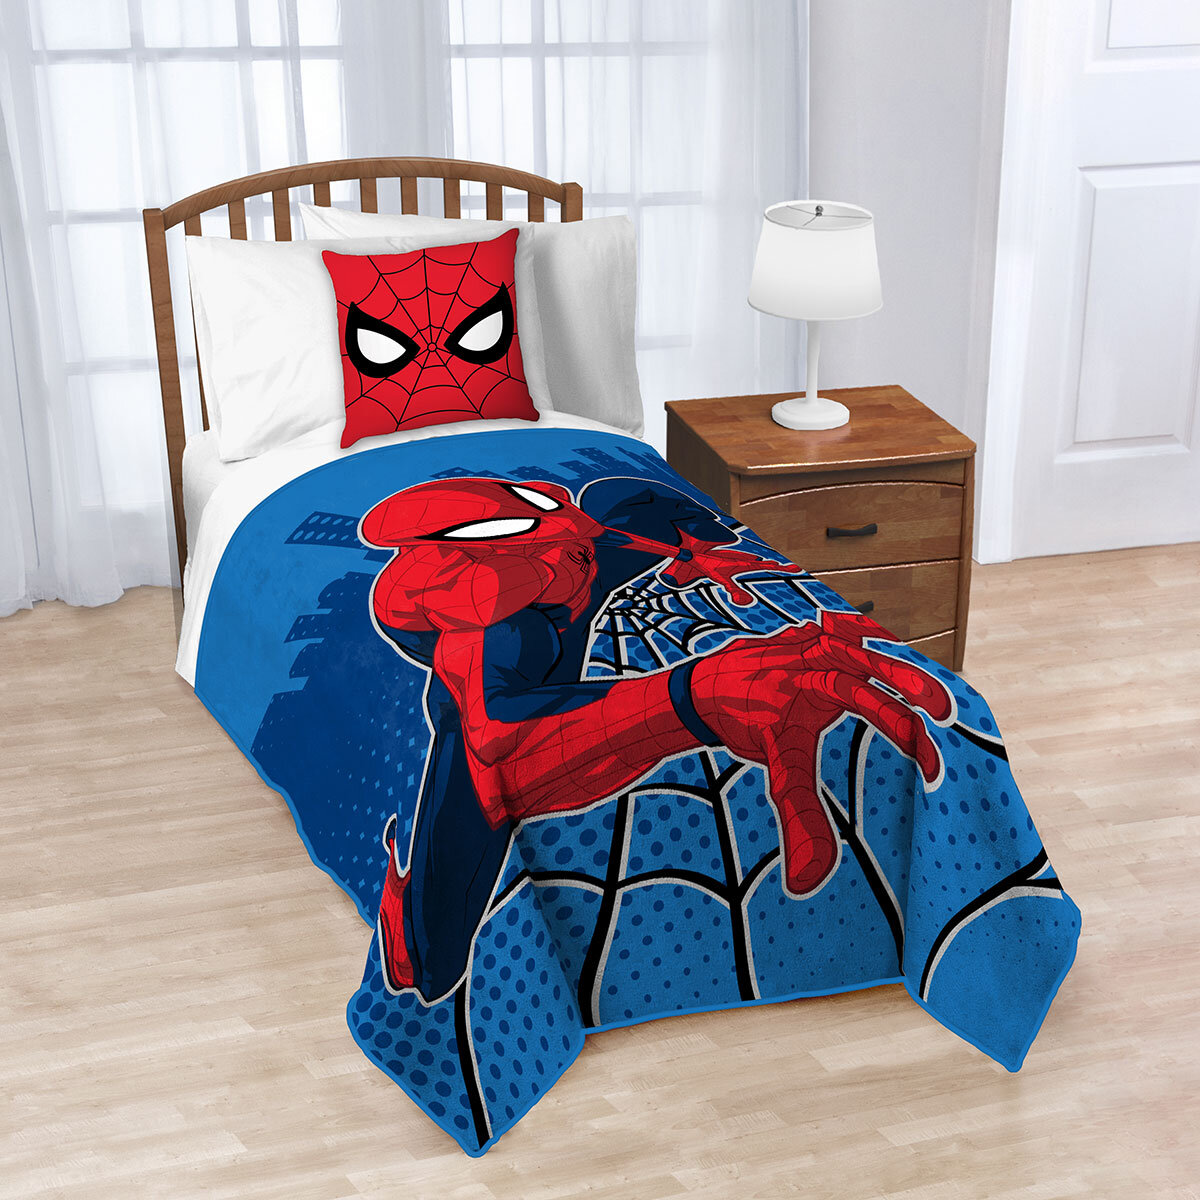 Licensed character throw and cushion